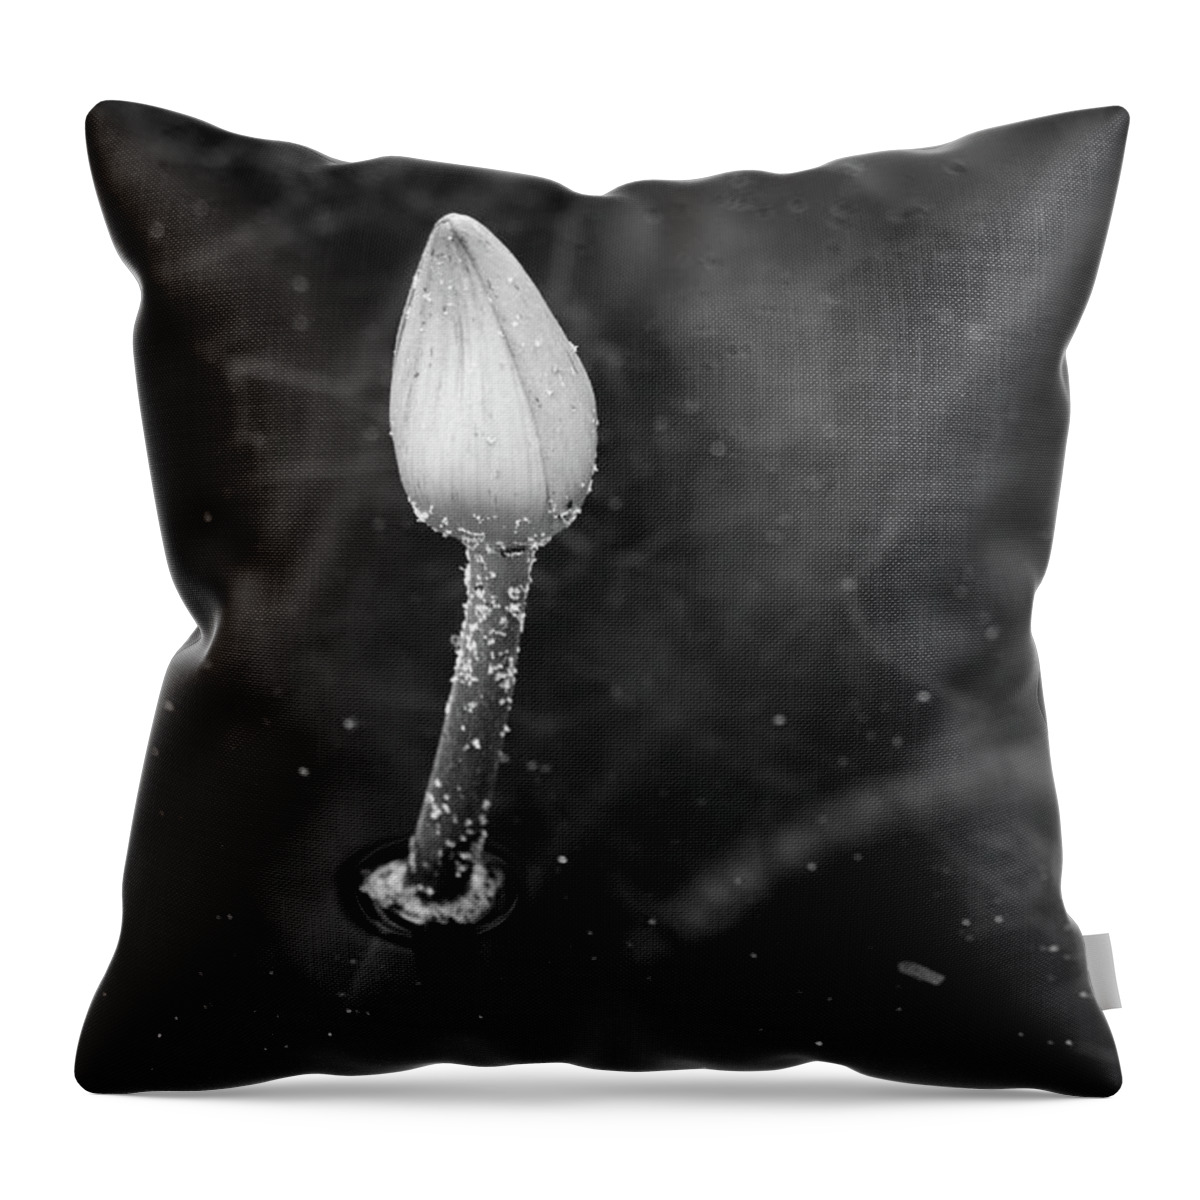 Lotus Throw Pillow featuring the photograph White Lotus Bud by Mary Anne Delgado